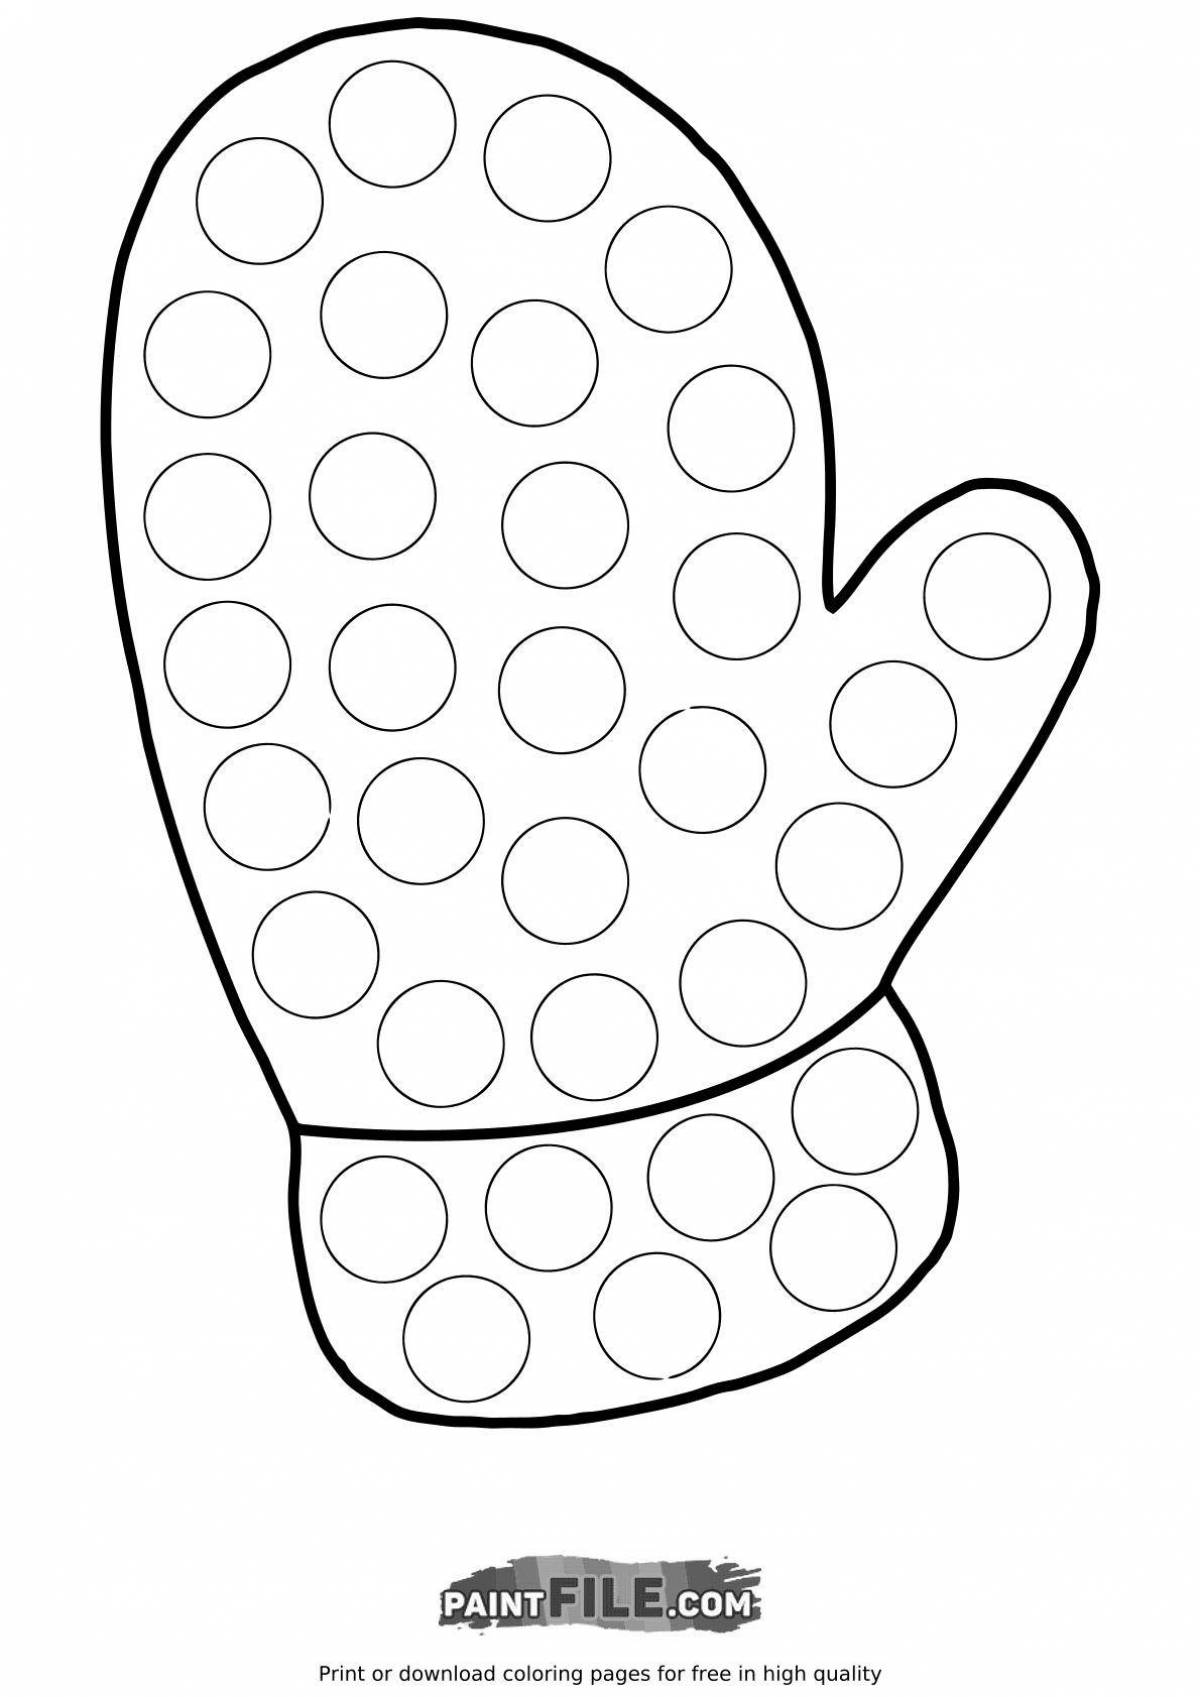 Gorgeous mitten coloring page